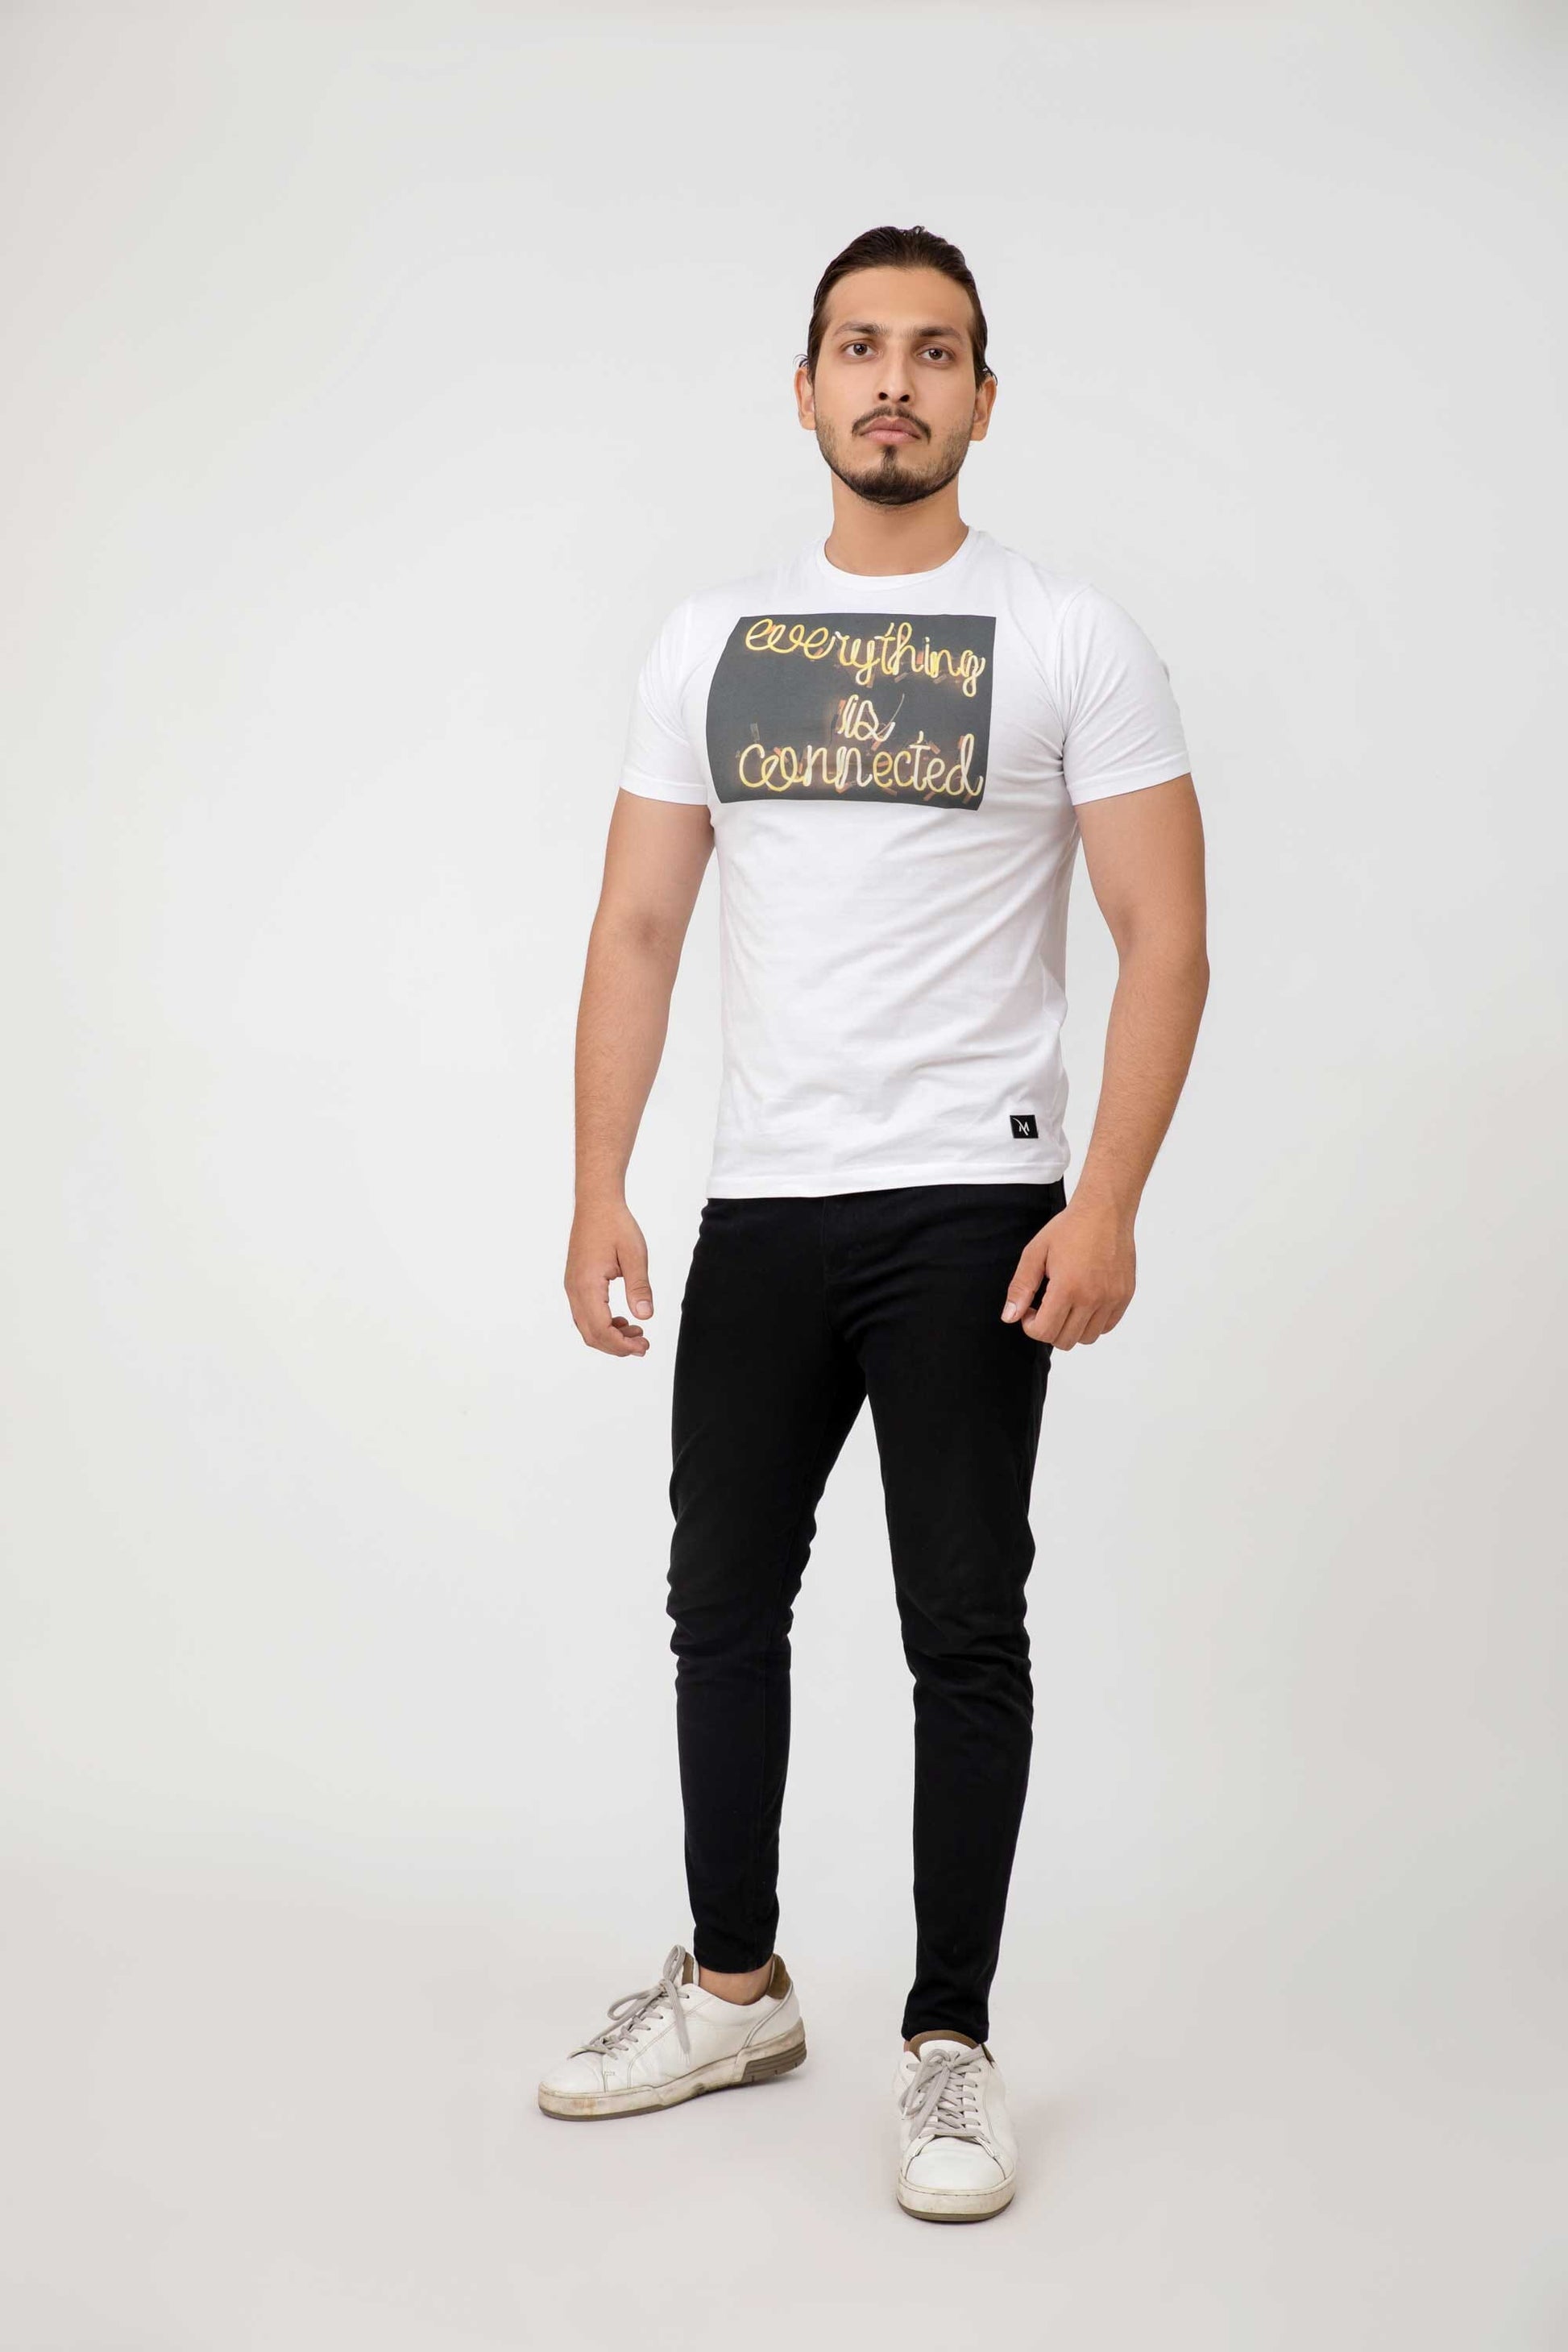 Madamadam Men's Every Thing Is Connected Printed Crew Neck Tee Shirt Men's Tee Shirt MADAMADAM 